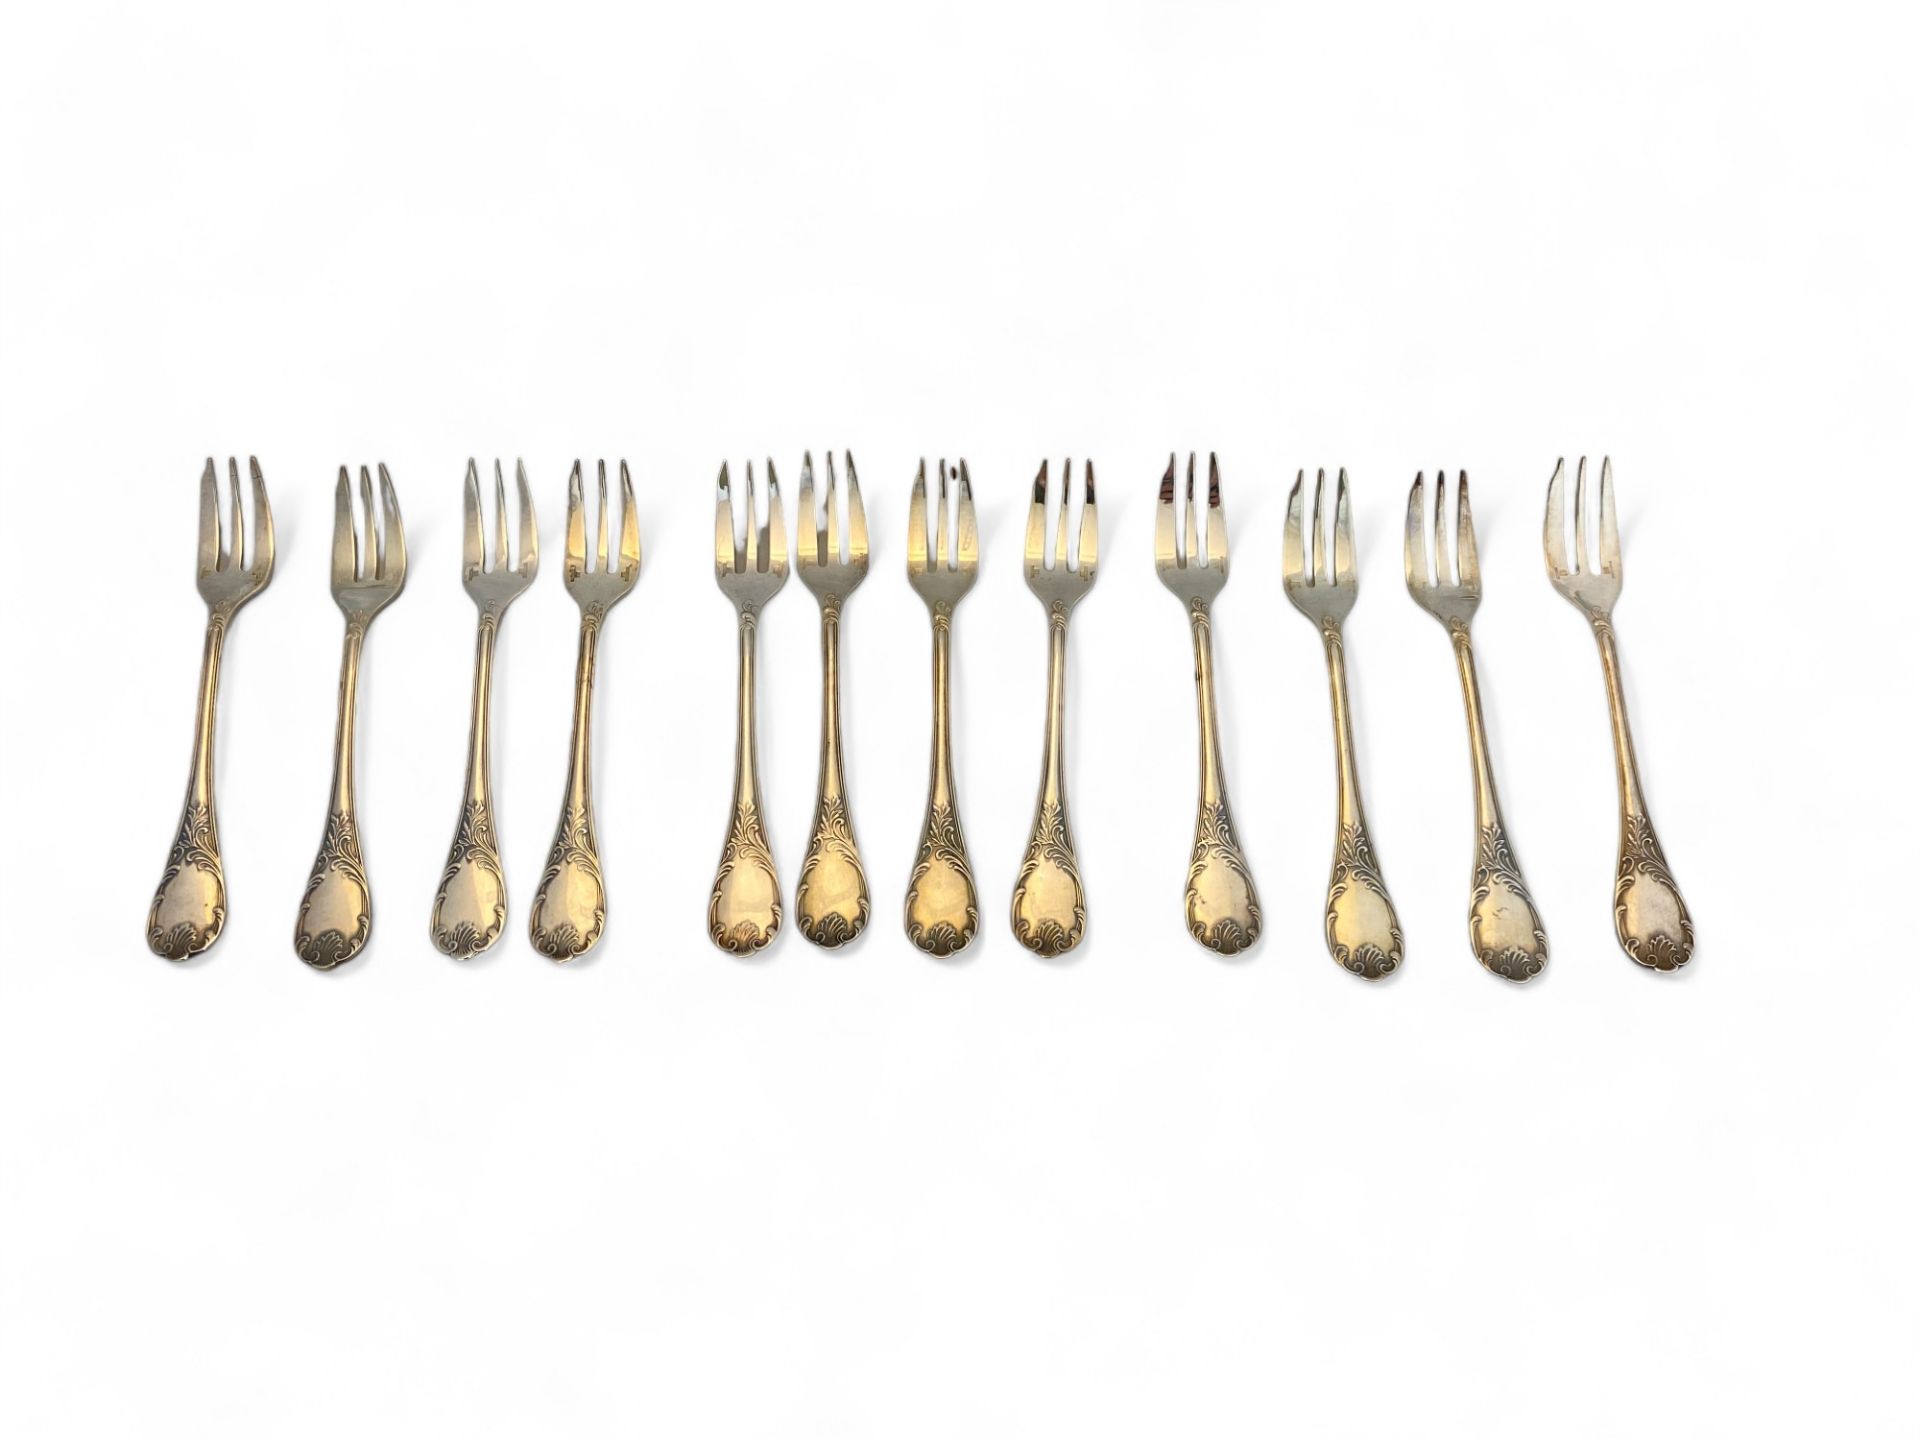 An extensive composite canteen of mostly silver plated Marly pattern cutlery by Christofle, Paris - Image 34 of 99